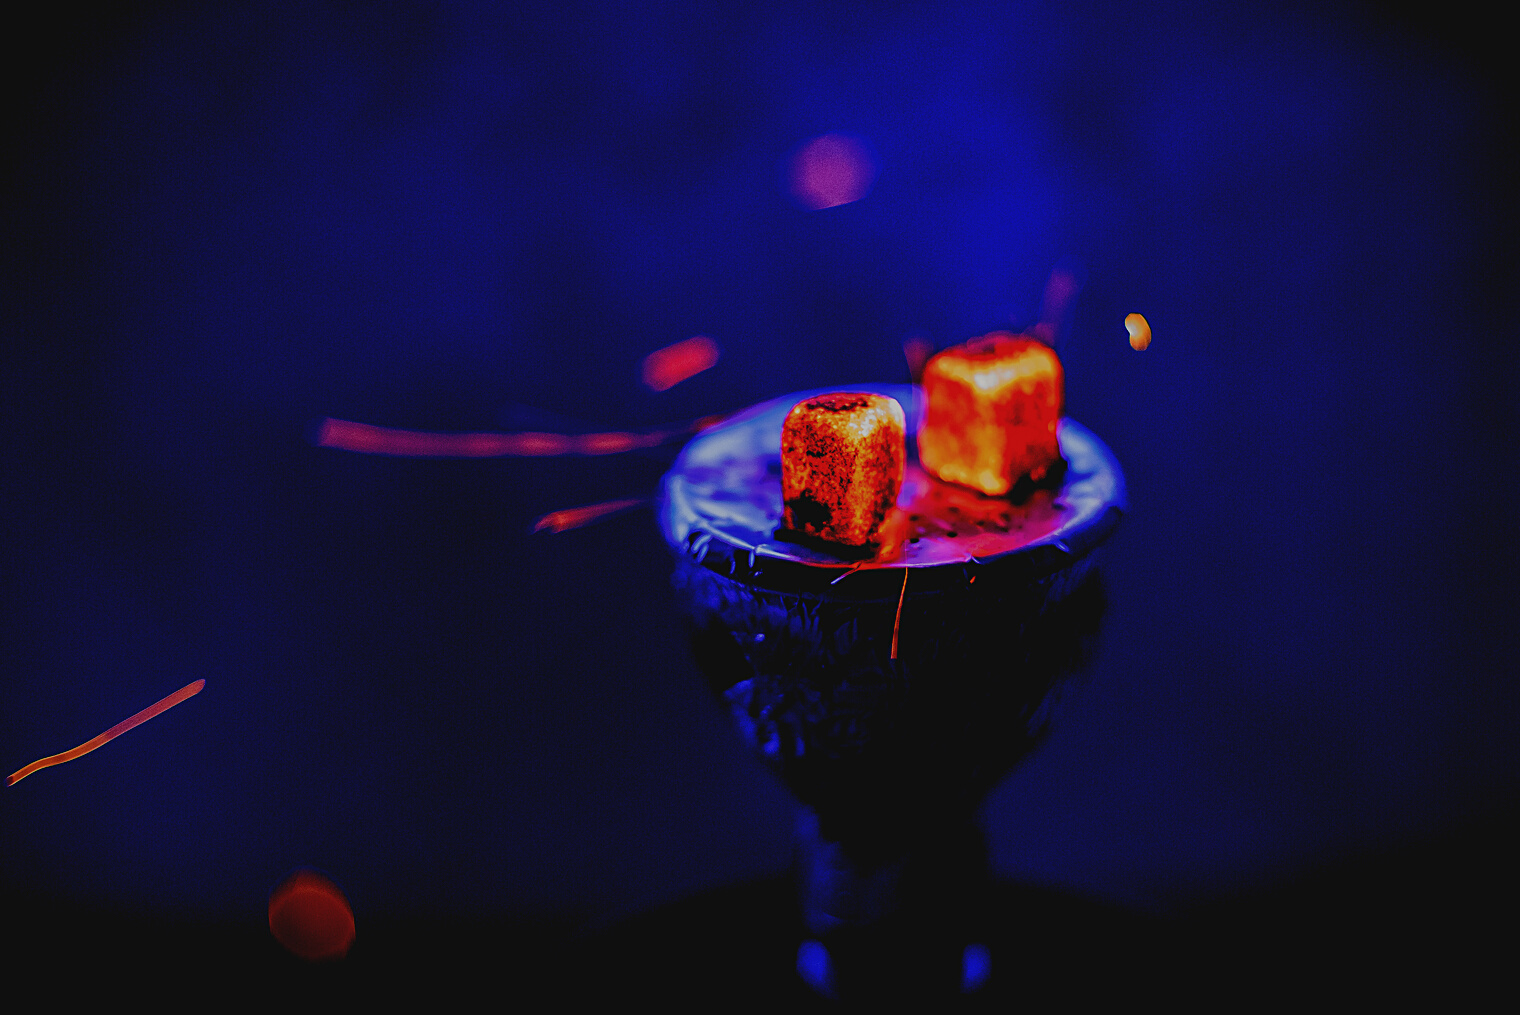 Hot Coals on the Bowl of the Hookah with Sparks